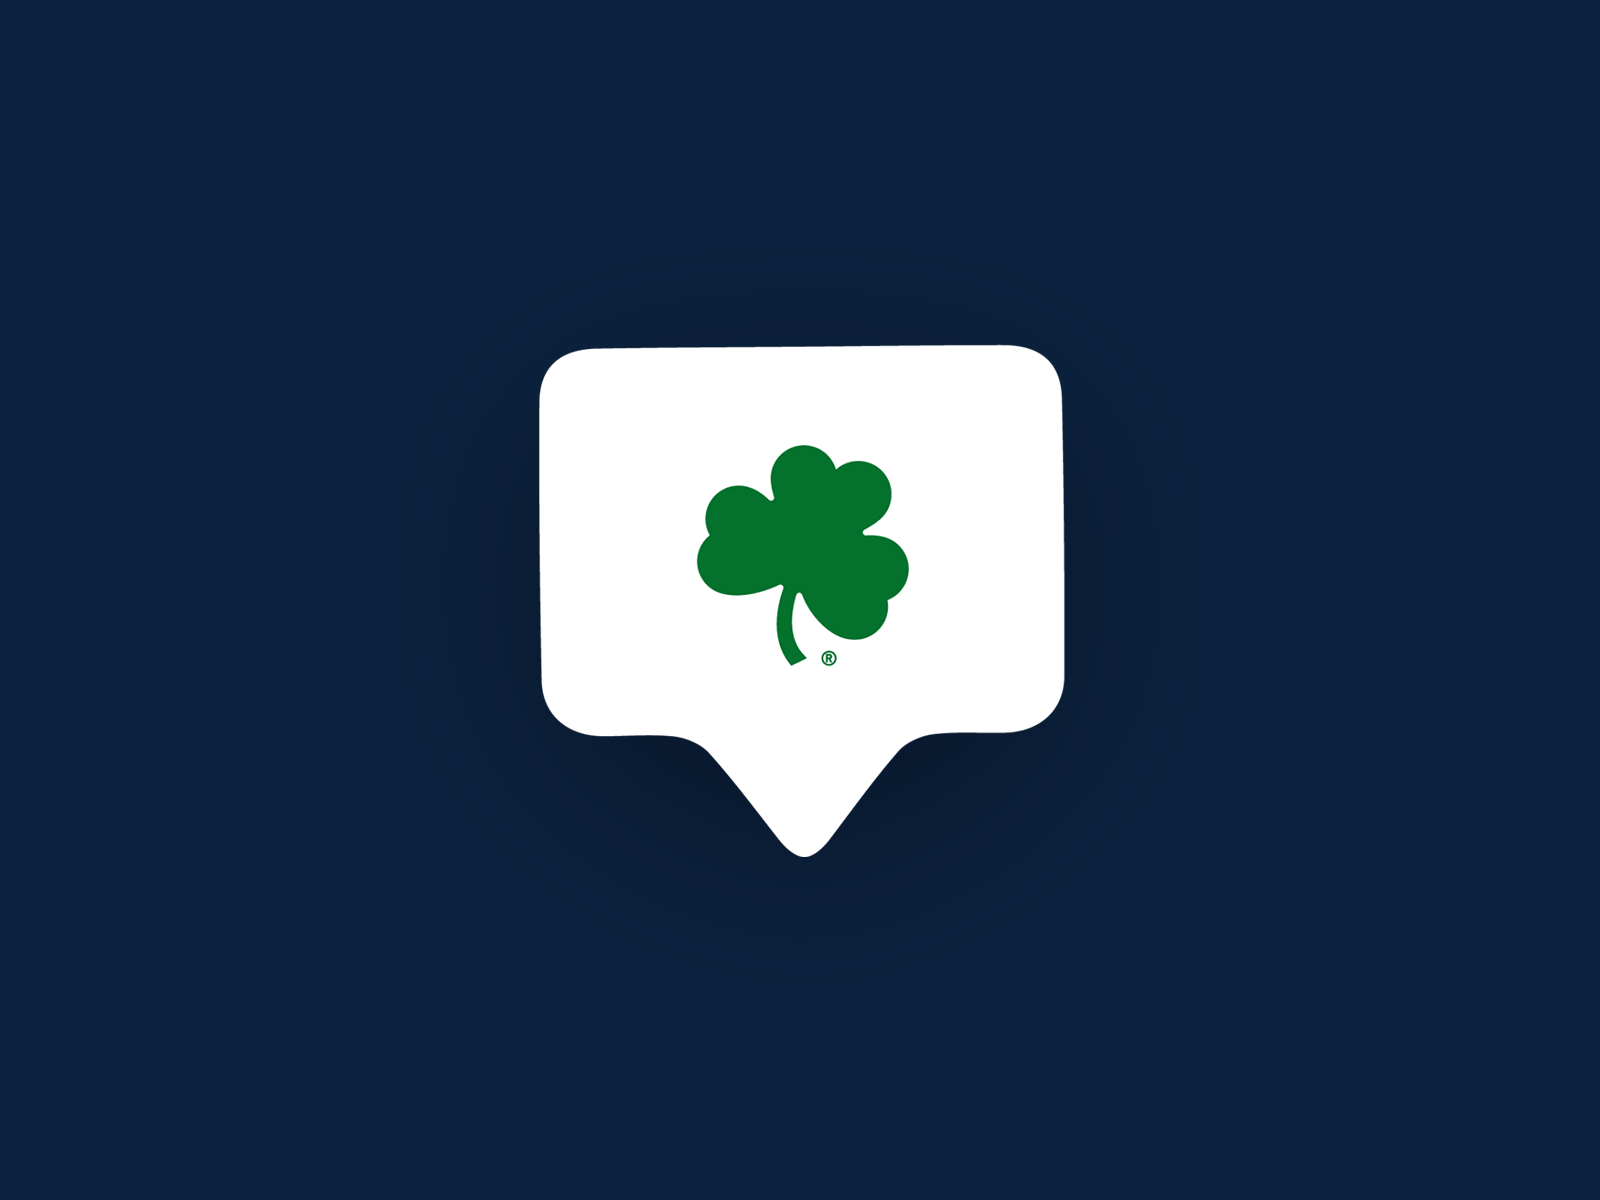 St. Pats Font by Andrew Sterlachini on Dribbble